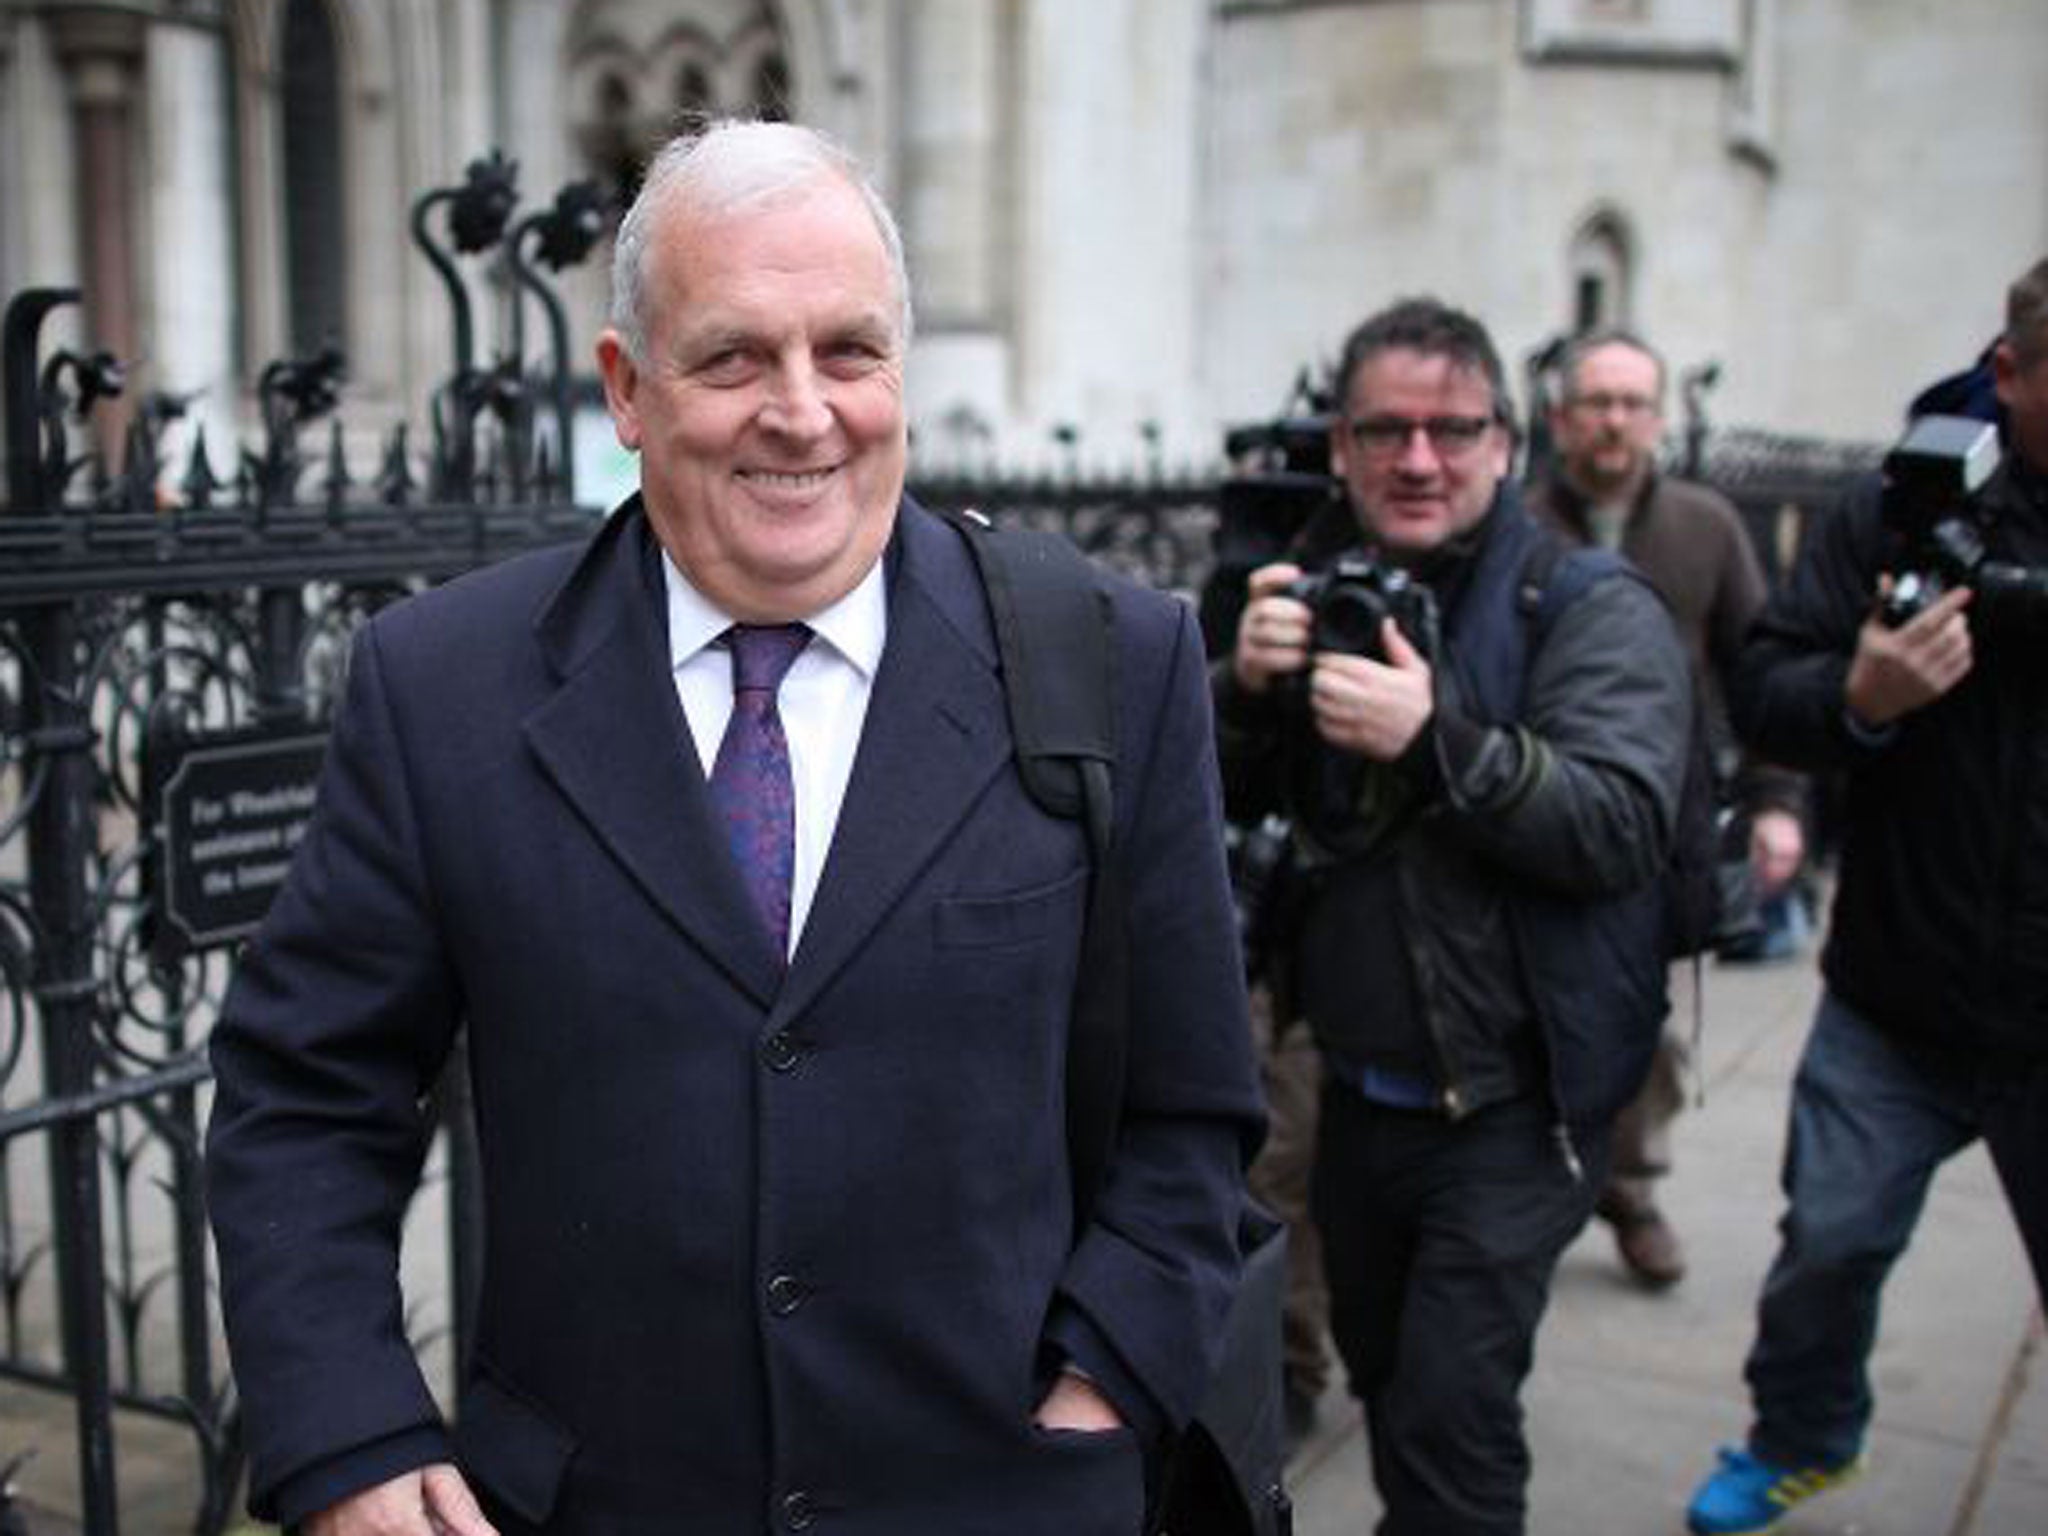 Kelvin MacKenzie’s apparent new career as star columnist on the Daily Telegraph website is over inside two days